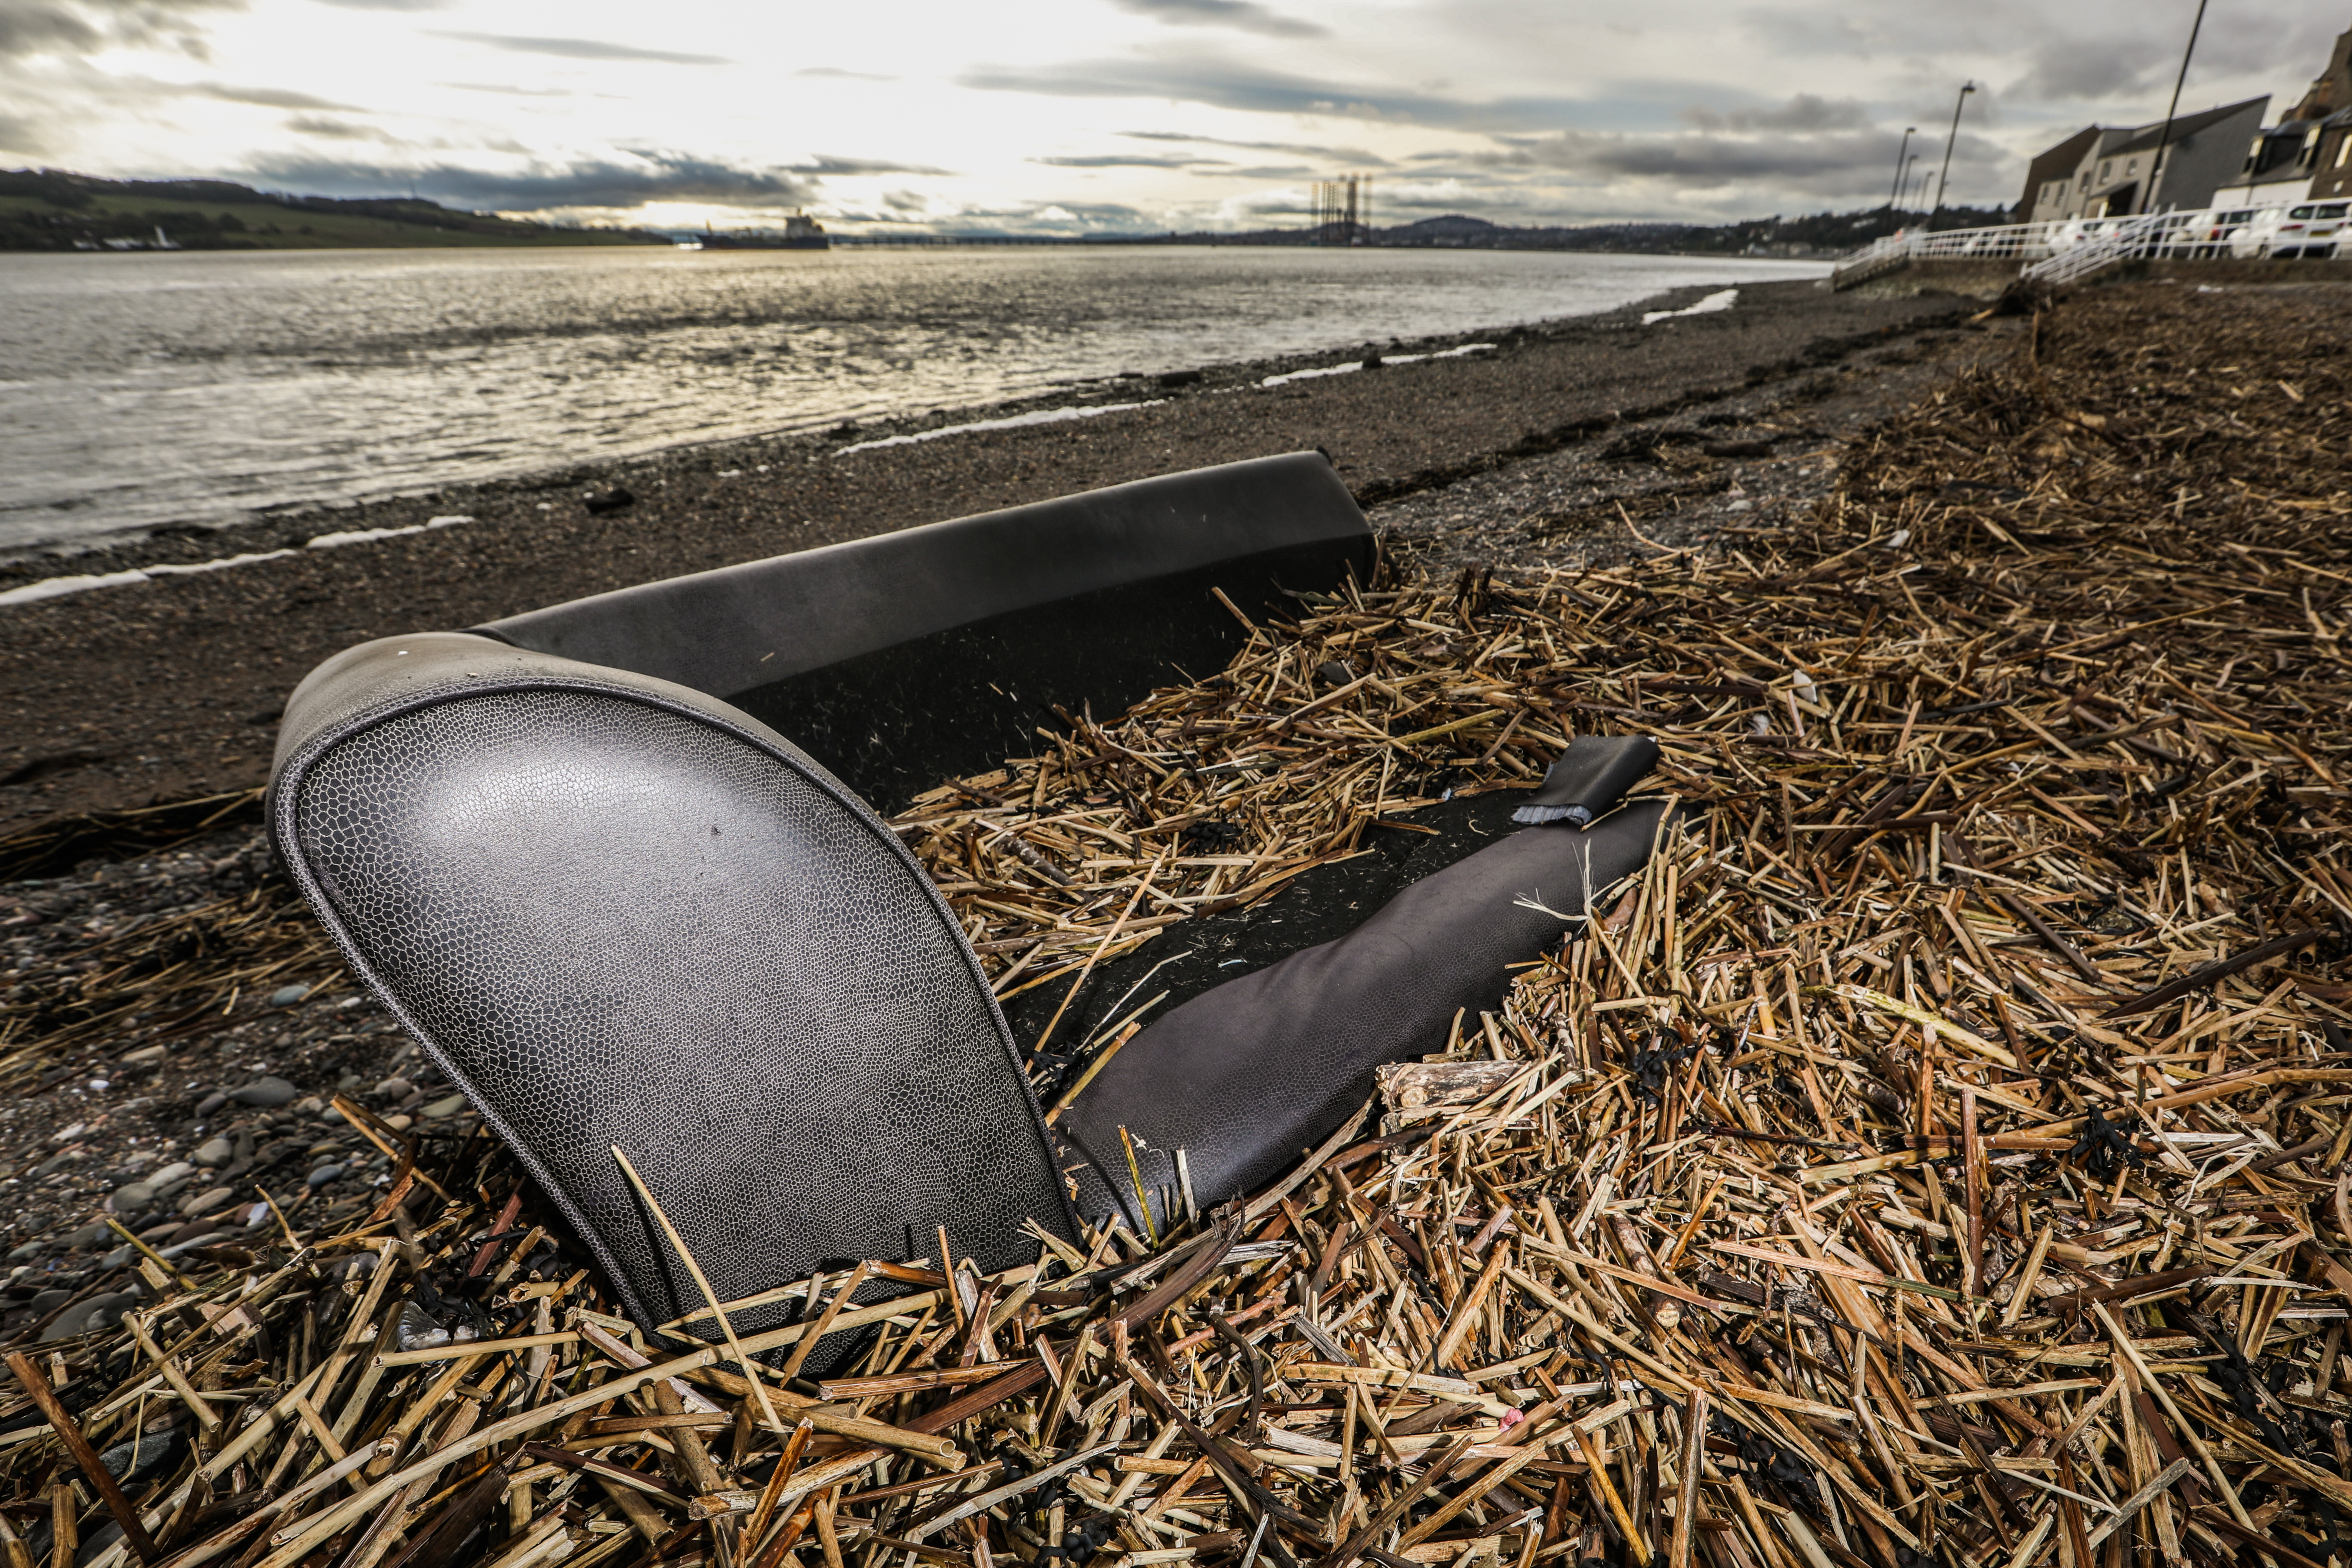 The couch on Broughty Ferry beach